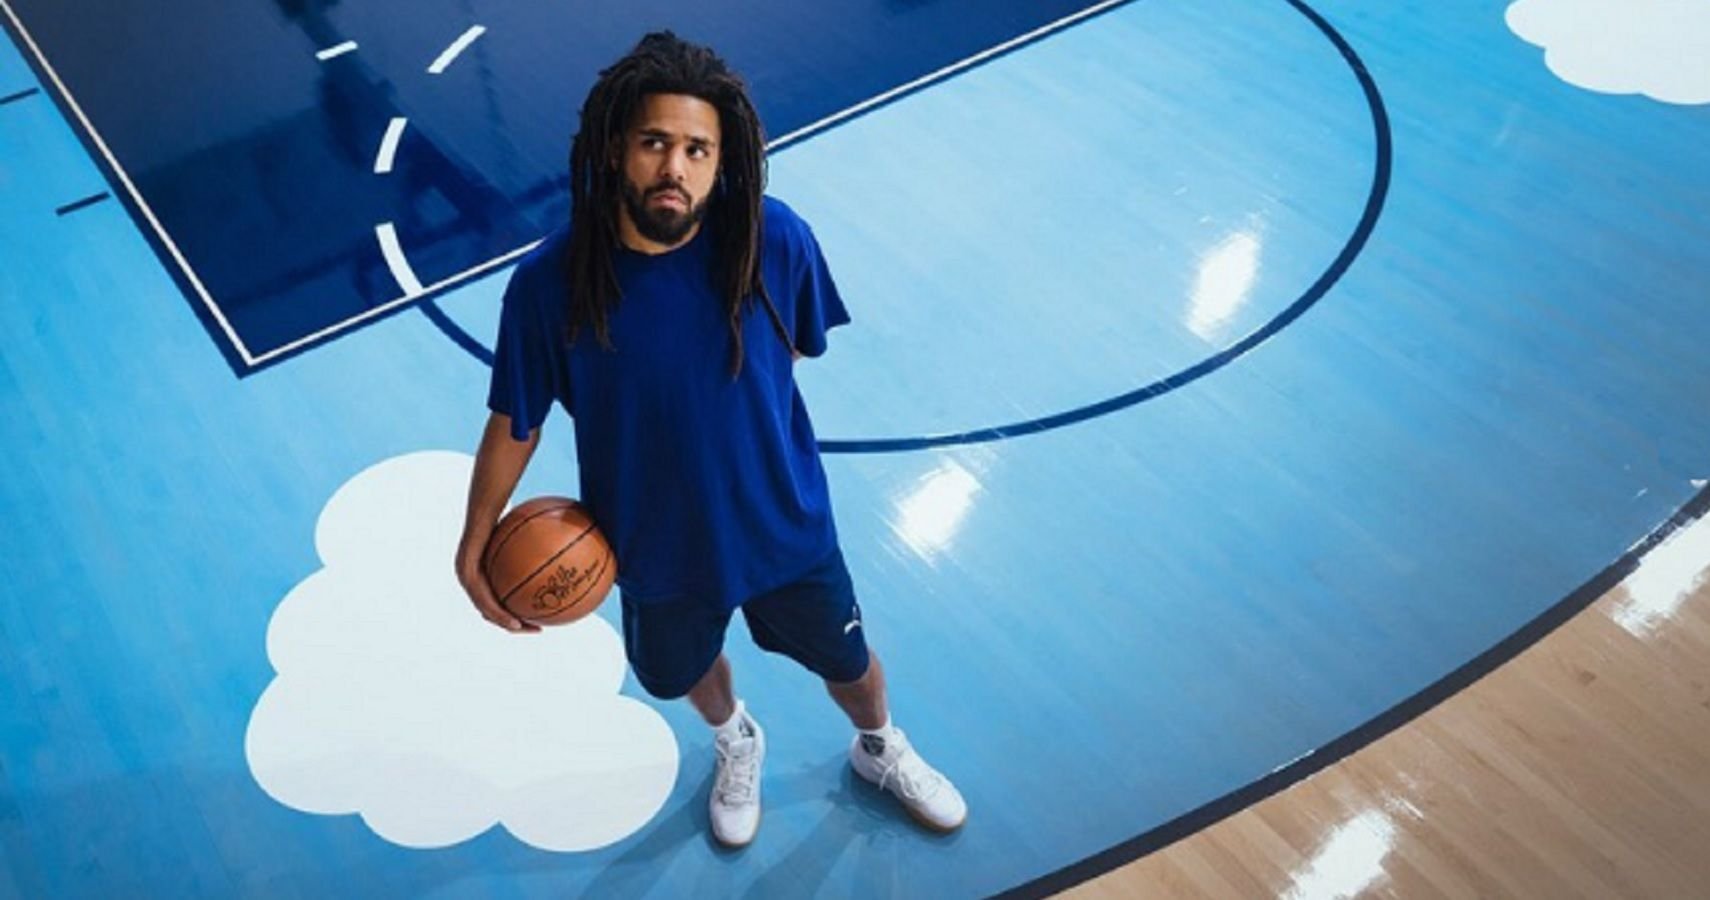 Here's How J. Cole Made His $60 Million Fortune